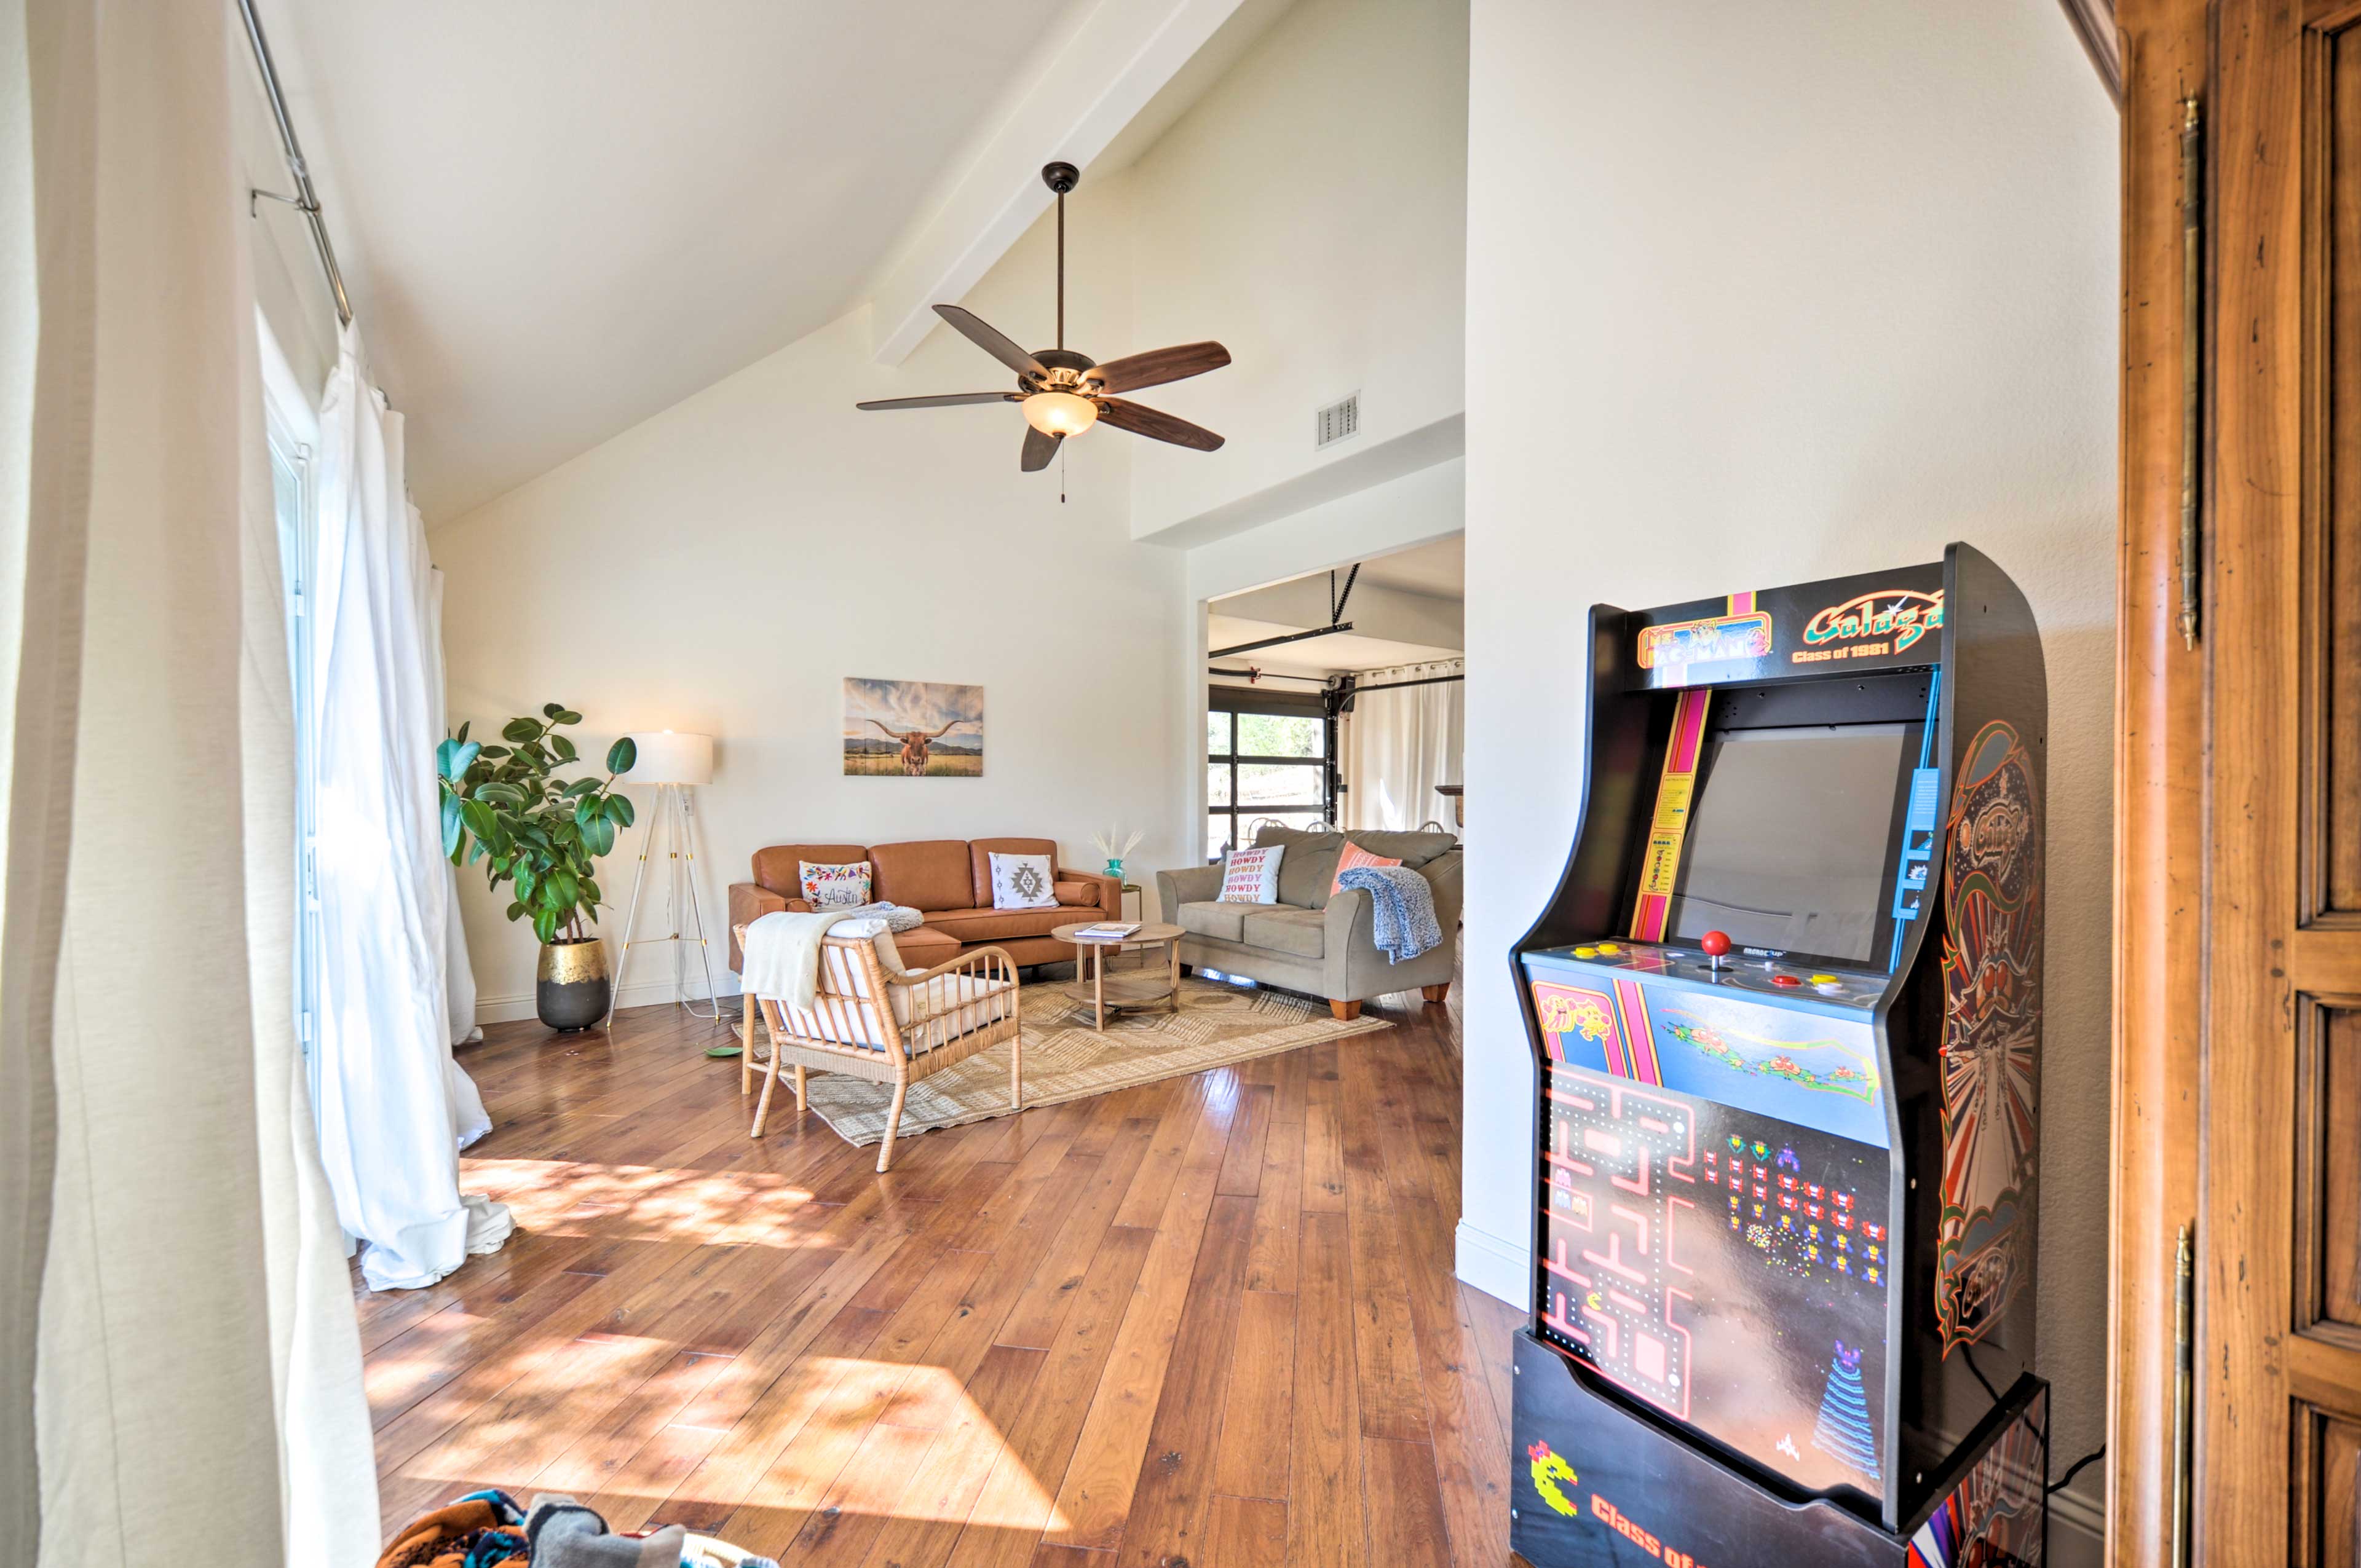 Living Room | 1st Floor | Free WiFi (1 Gbps) | Arcade Game | Smart TV w/ Cable